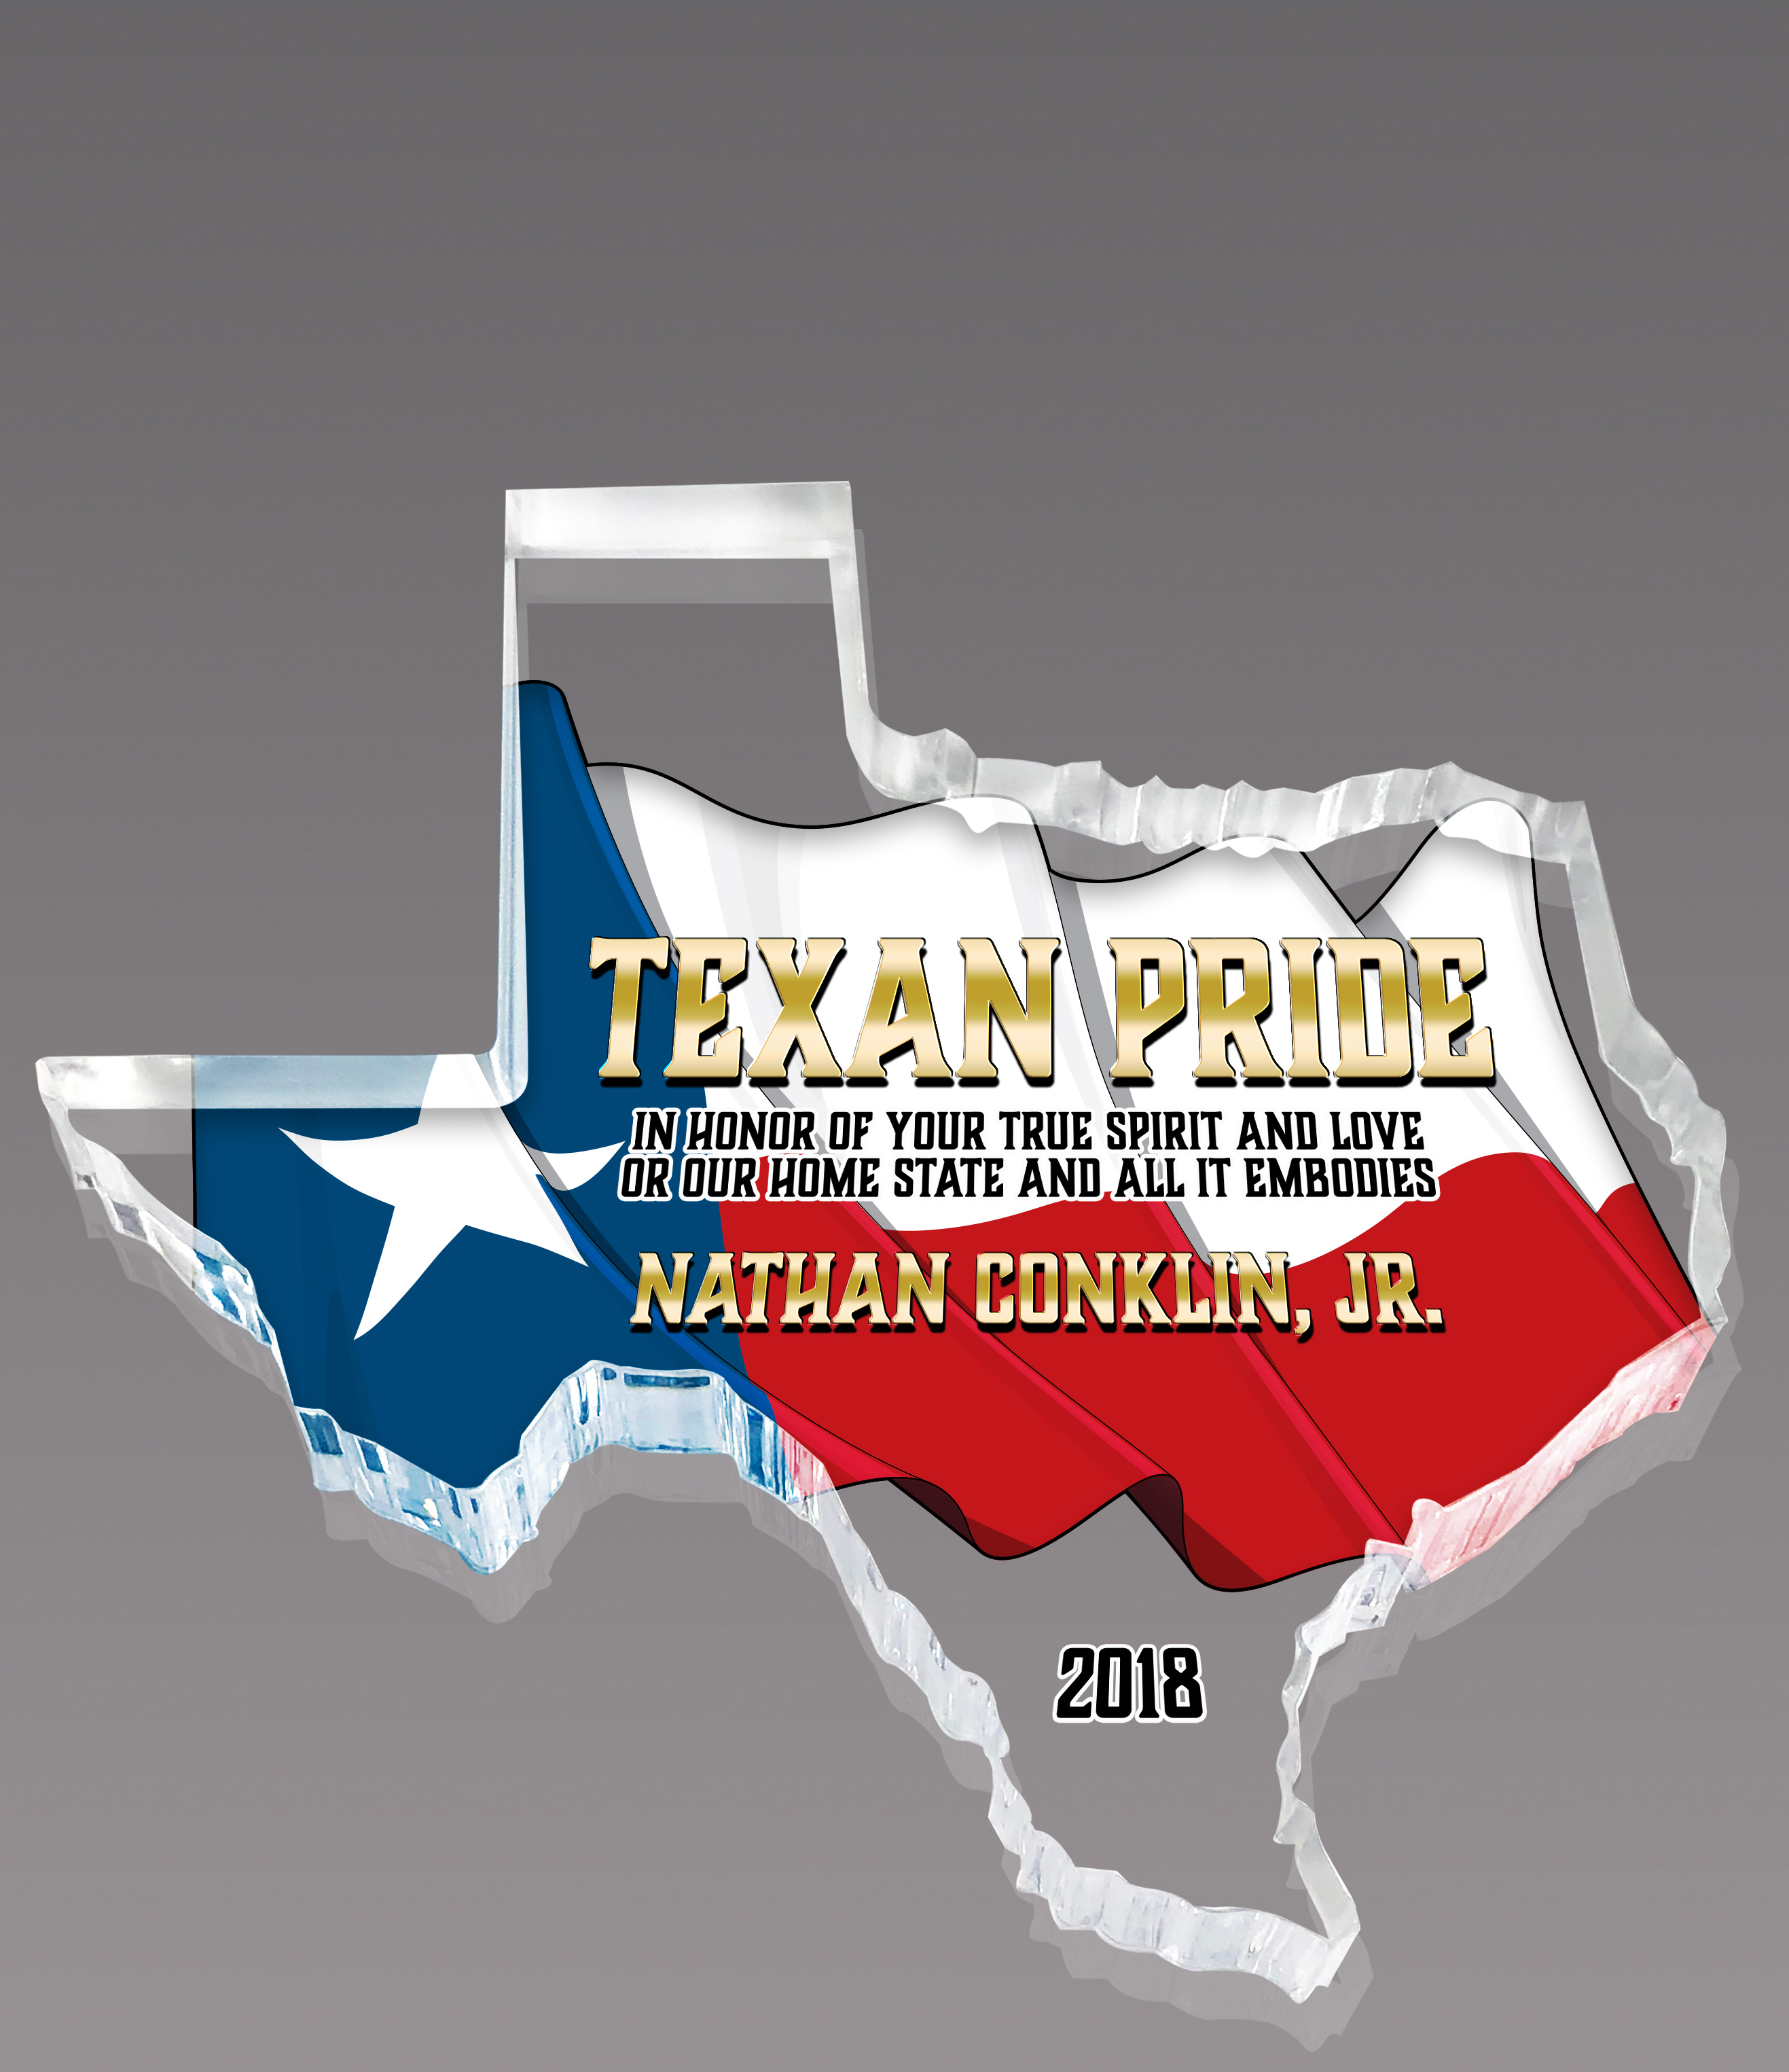 Texas Full Color Paperweight Acrylic Award - 4.25 inch